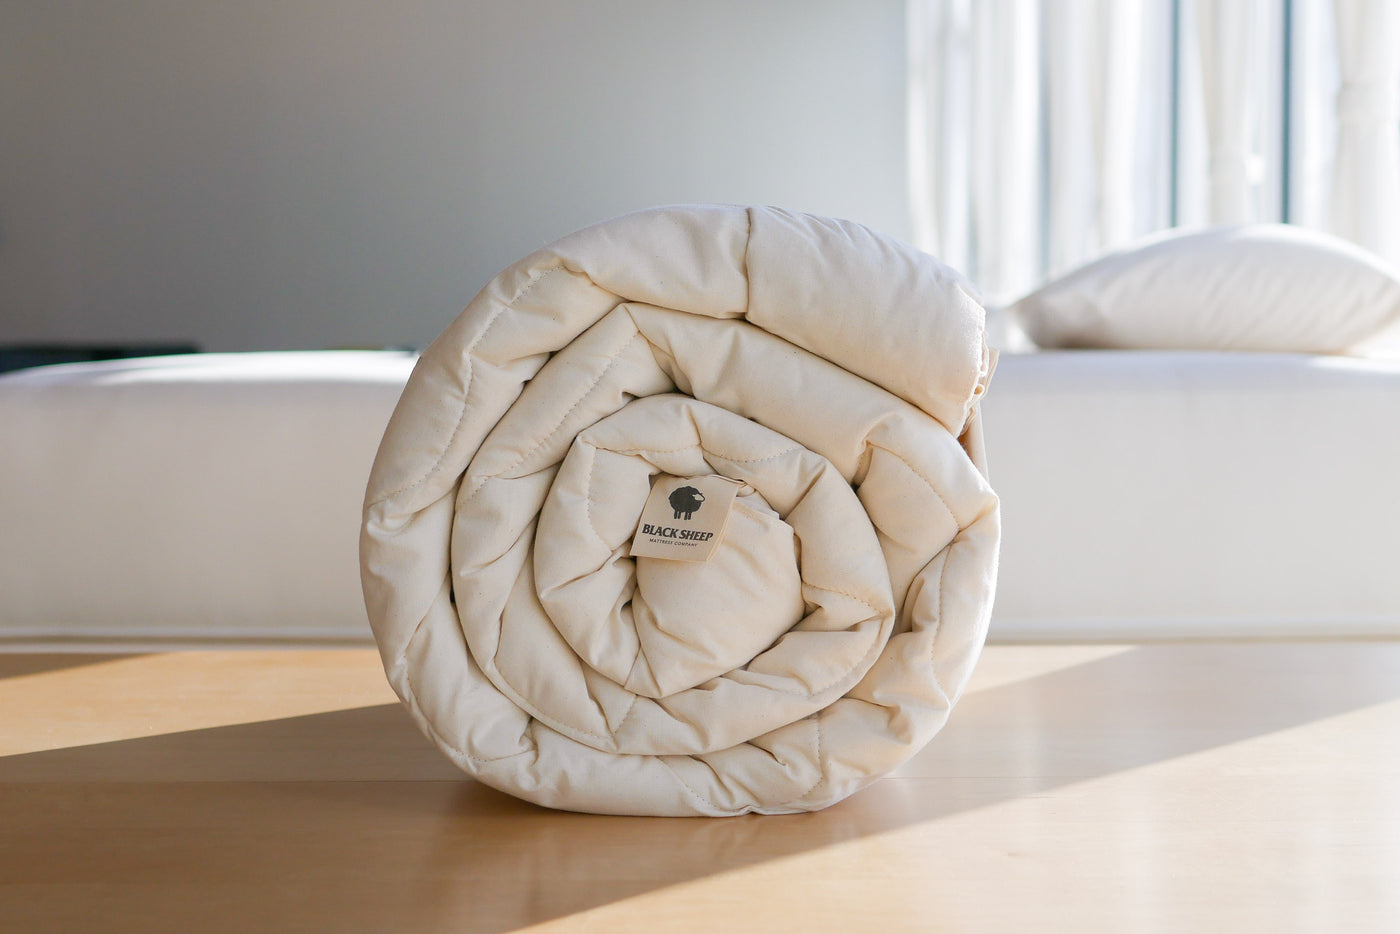 Rolled up natural wool duvet made in Calgary, AB by Black Sheep Mattress Company